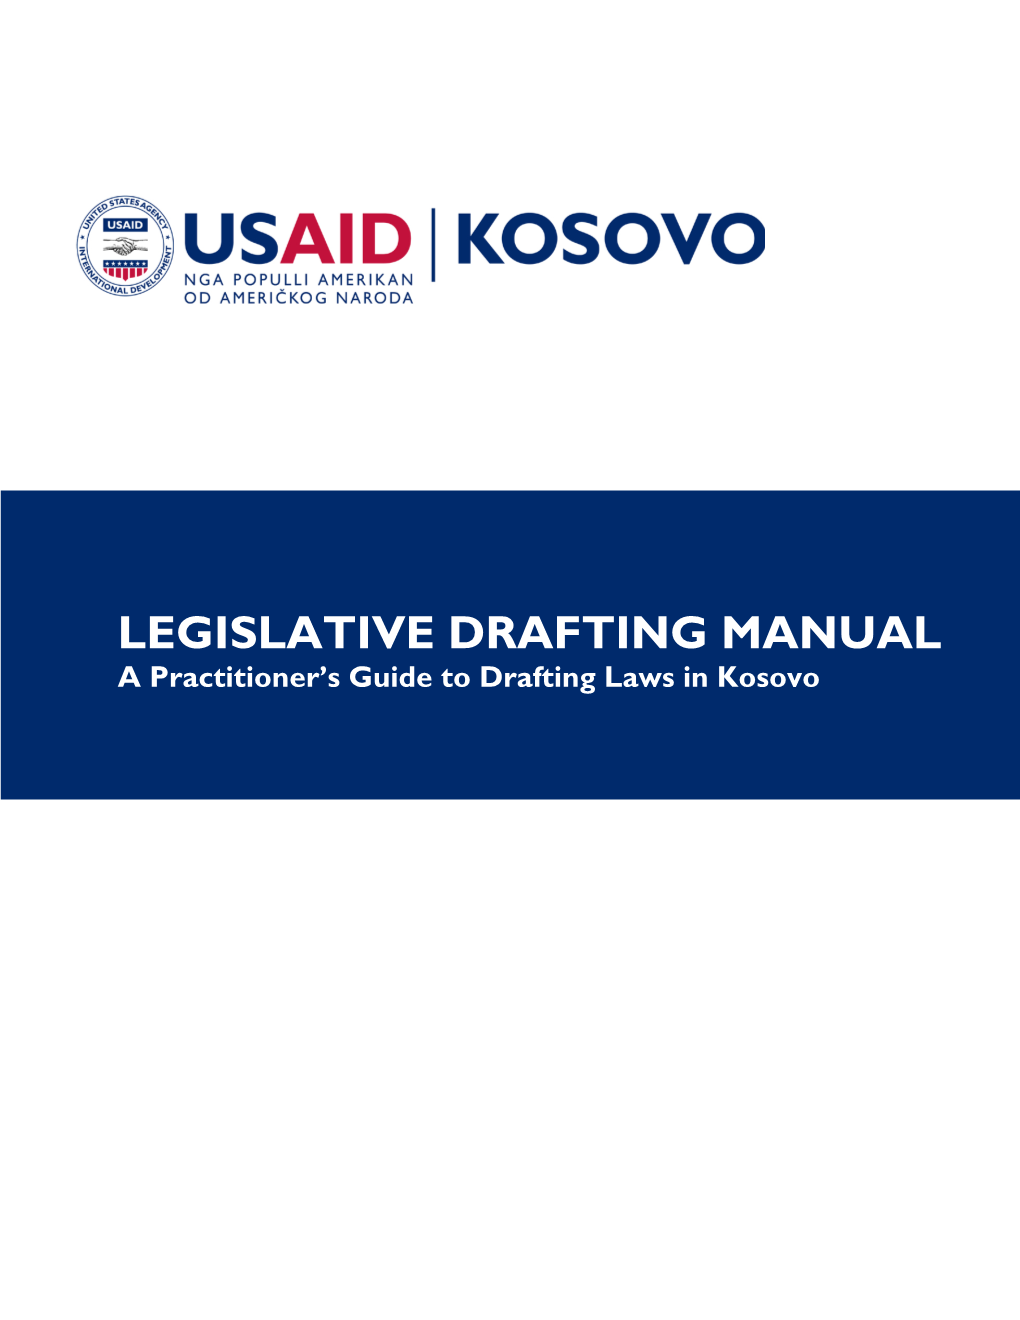 LEGISLATIVE DRAFTING MANUAL a Practitioner’S Guide to Drafting Laws in Kosovo